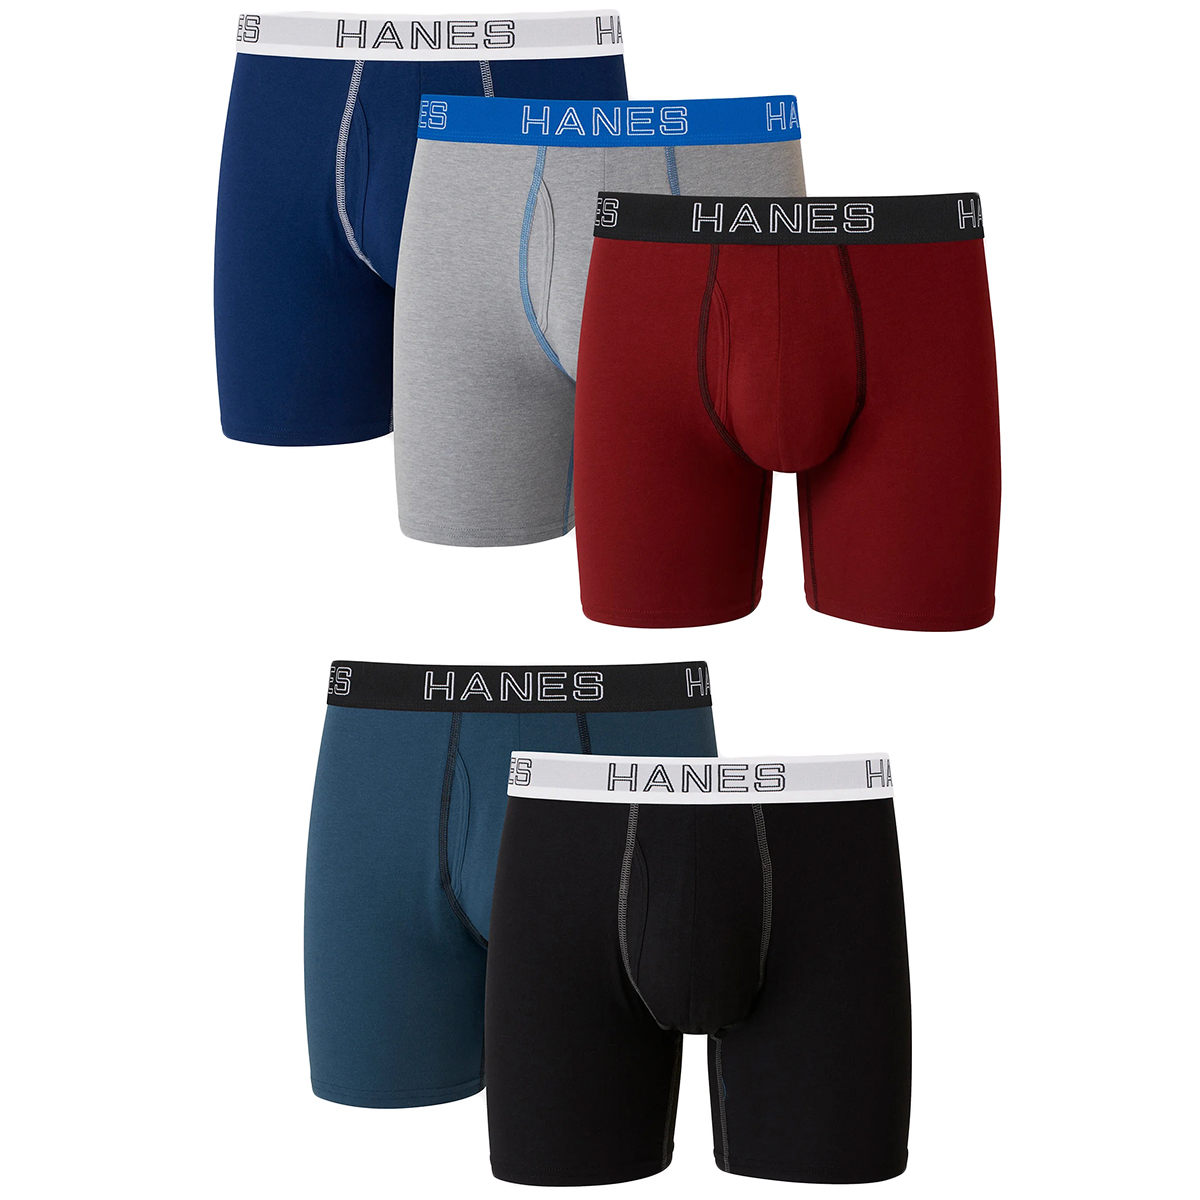 Hanes Ultimate Men's Stretch Boxer Brief, 5-Pack Extended Size